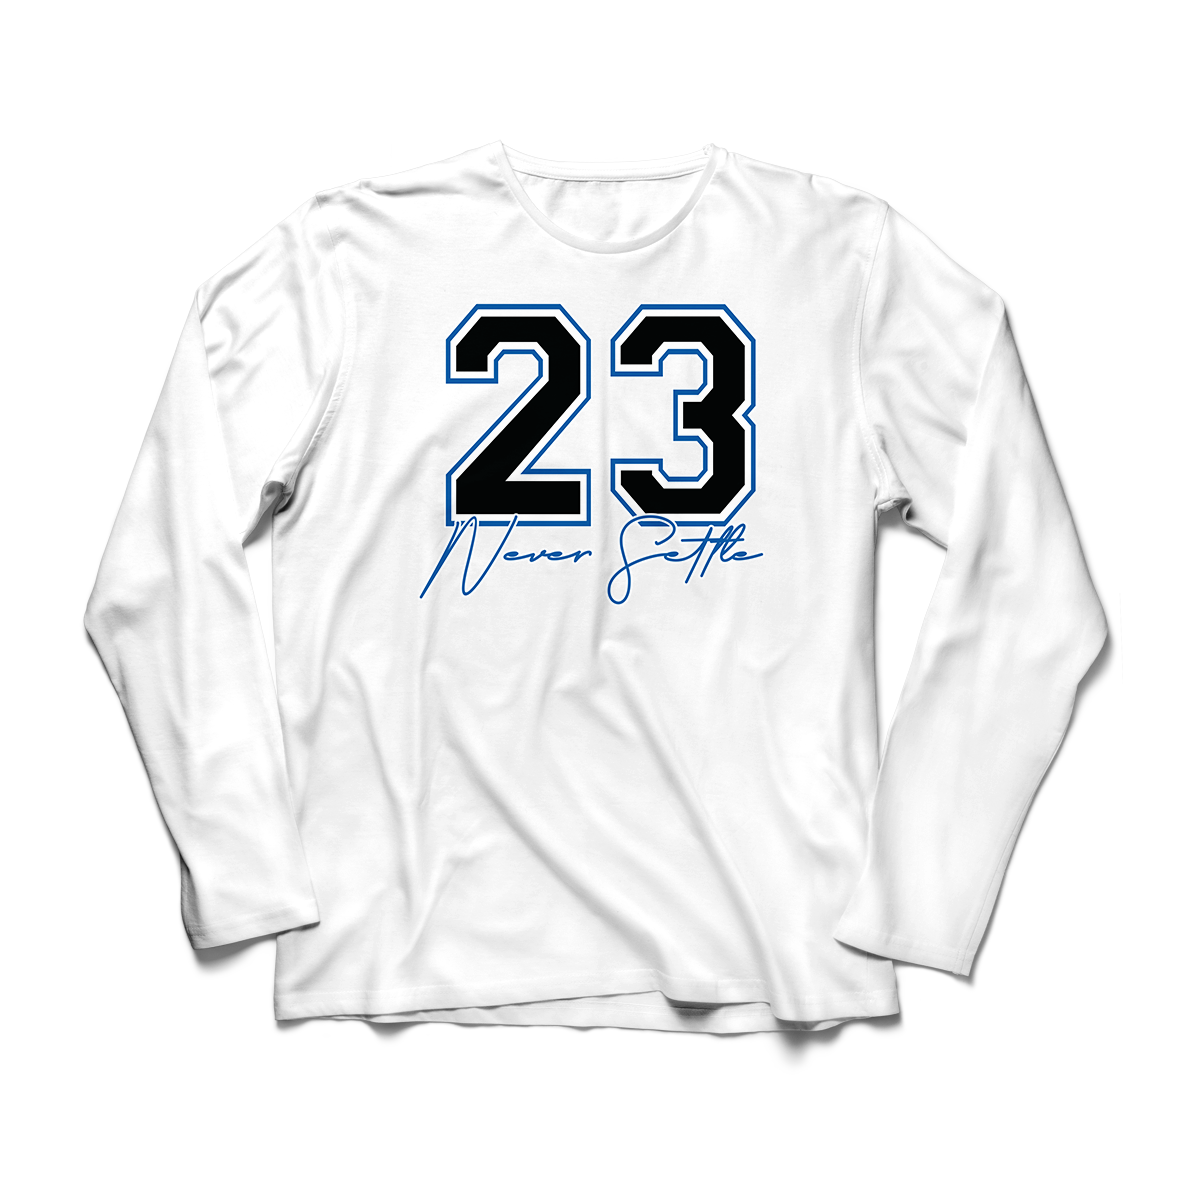 'Never Settle' in Game Royal CW Men's Comfort Long Sleeve